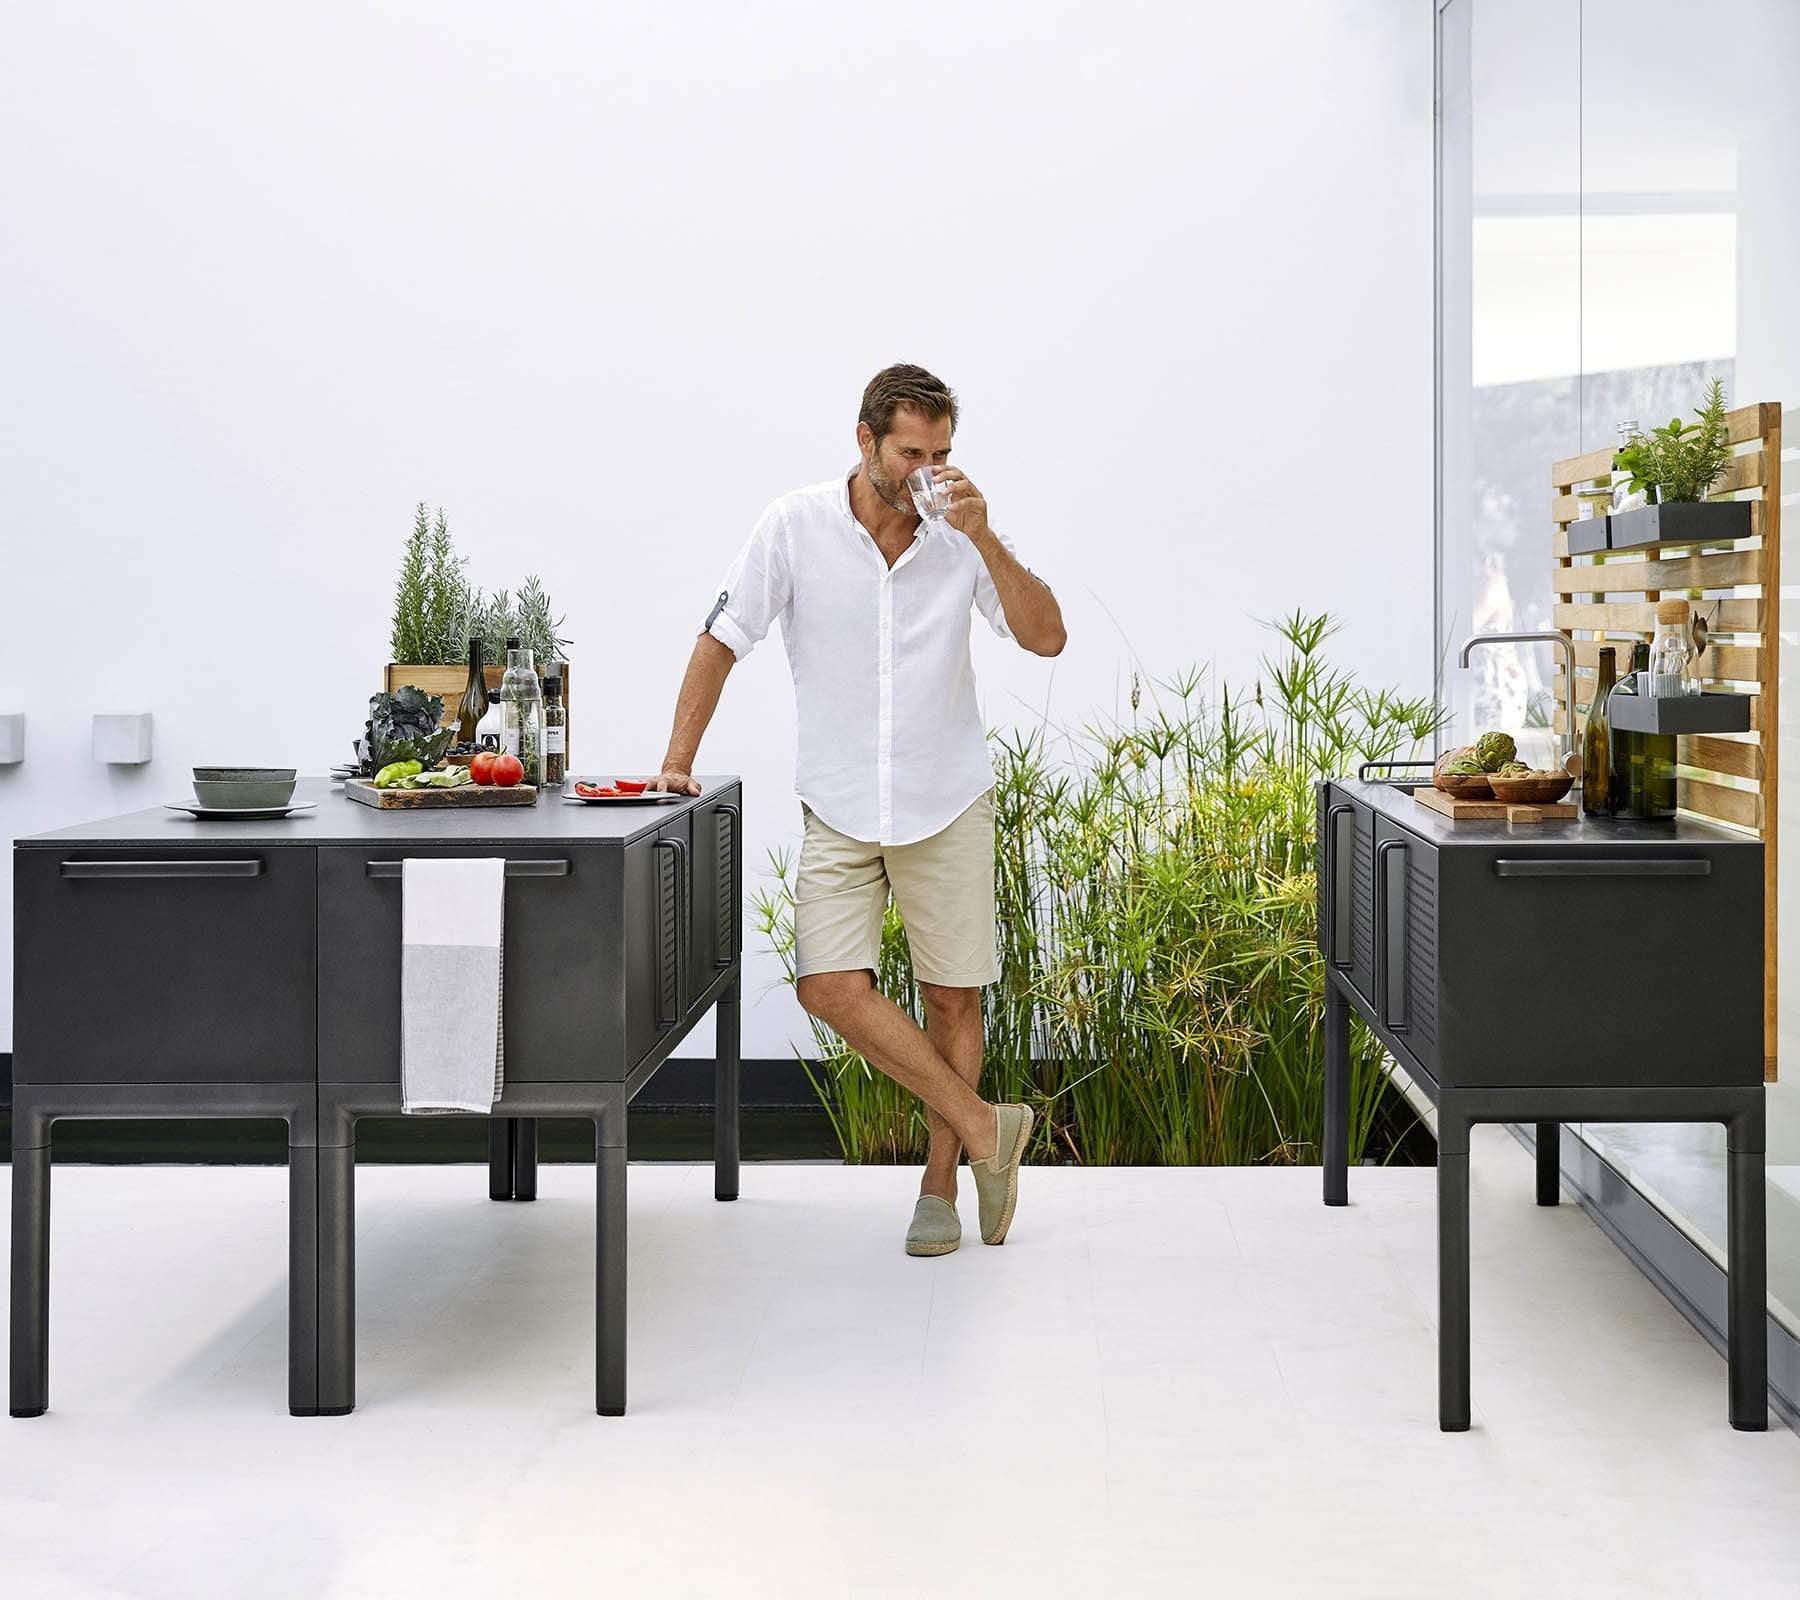 Boxhill's Drop Outdoor Kitchen Module with 3 Shelves lifestyle image with a man on white shirt drinking water